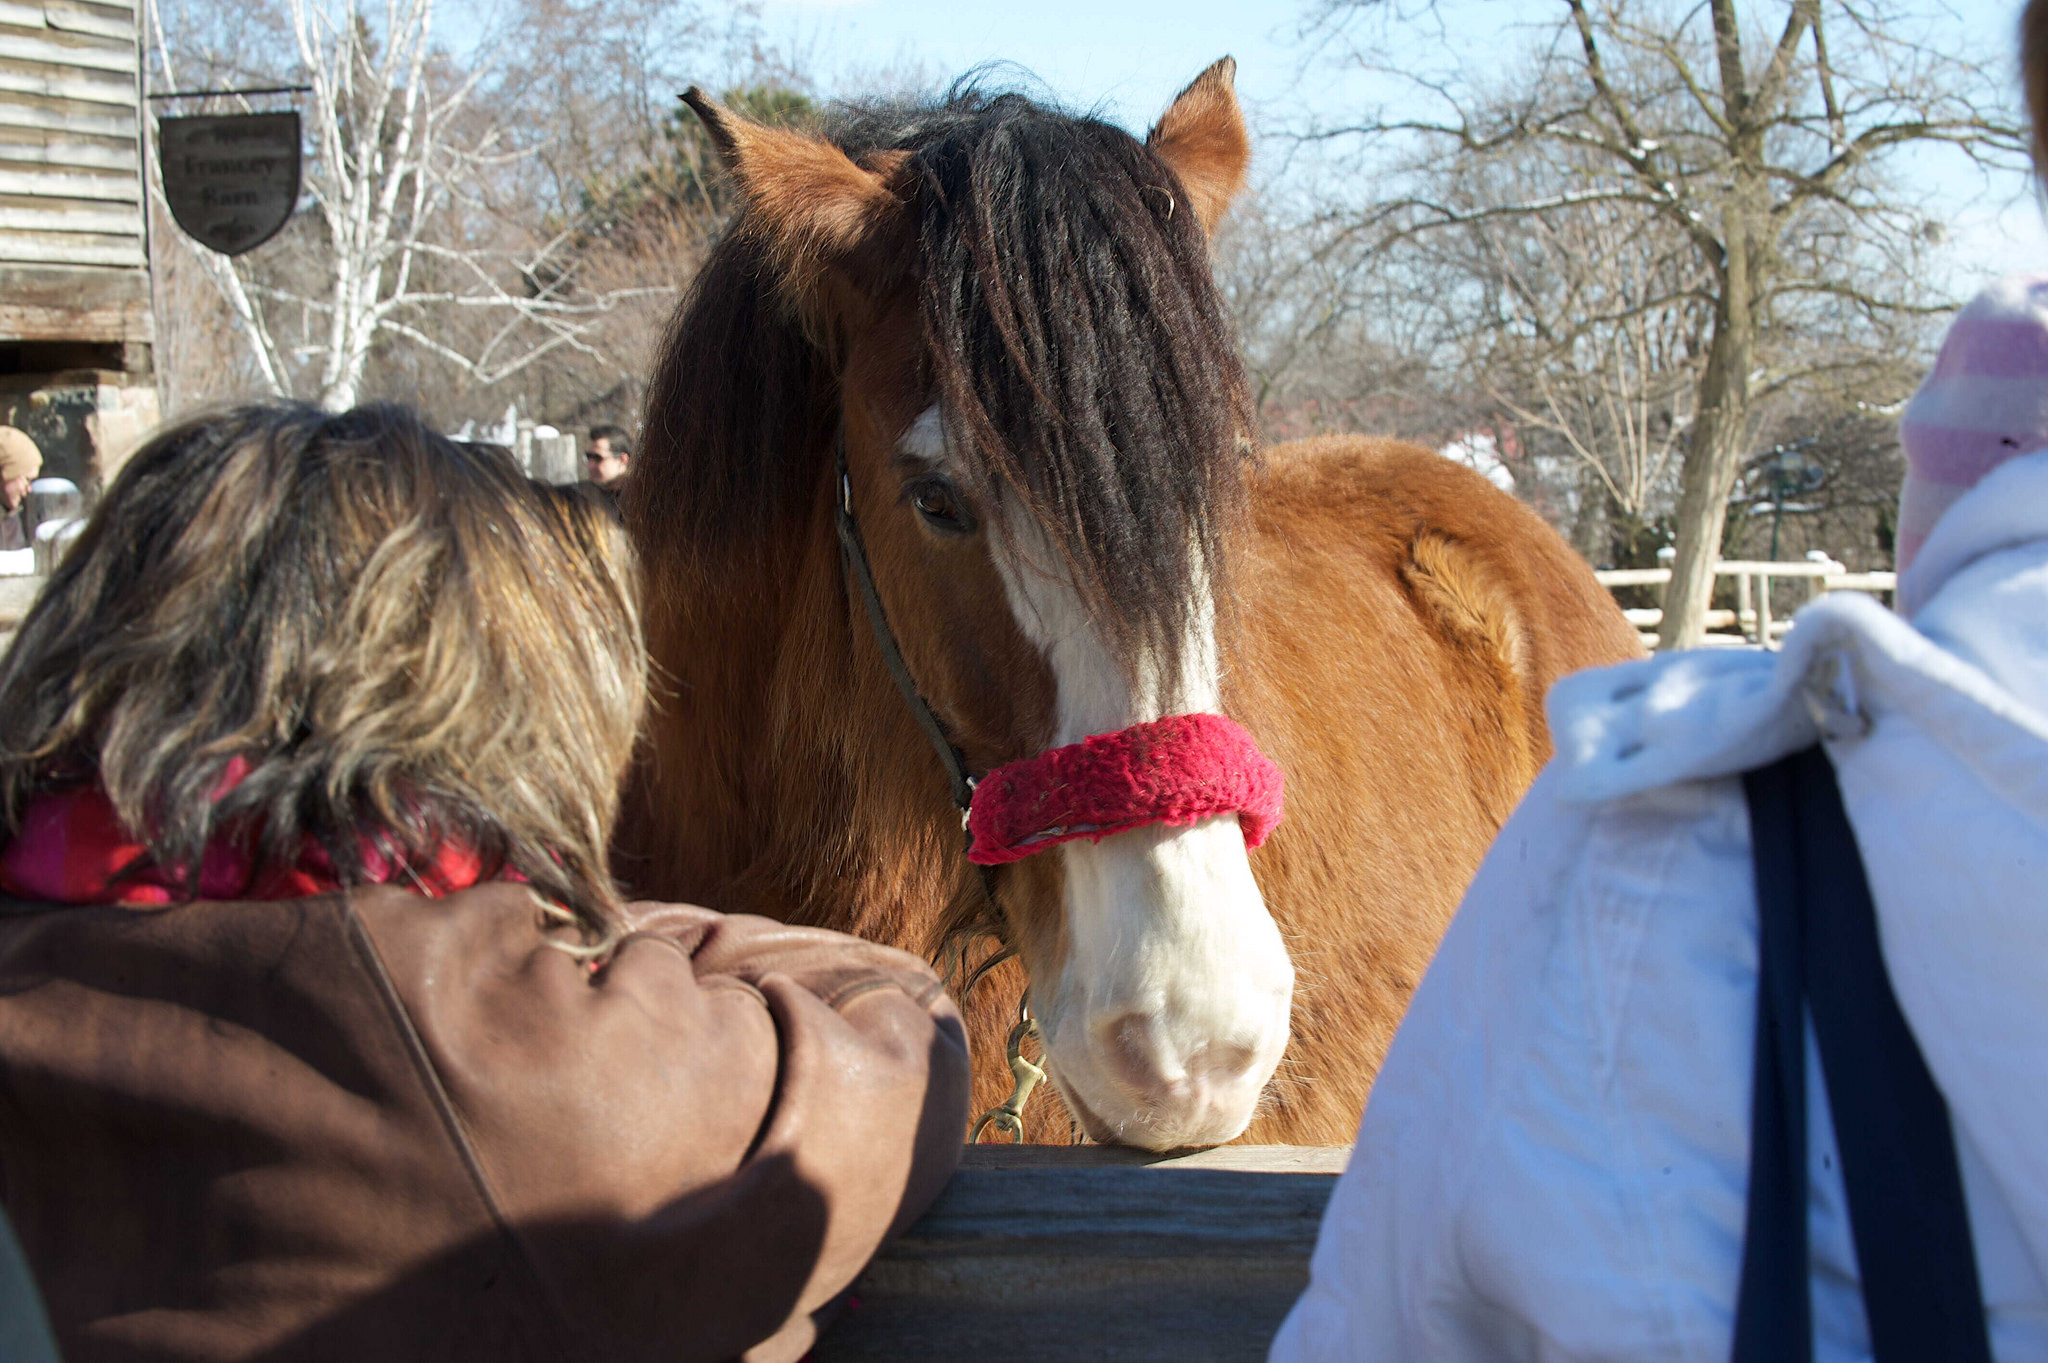 Image of horse and people at Riverdale Farm.